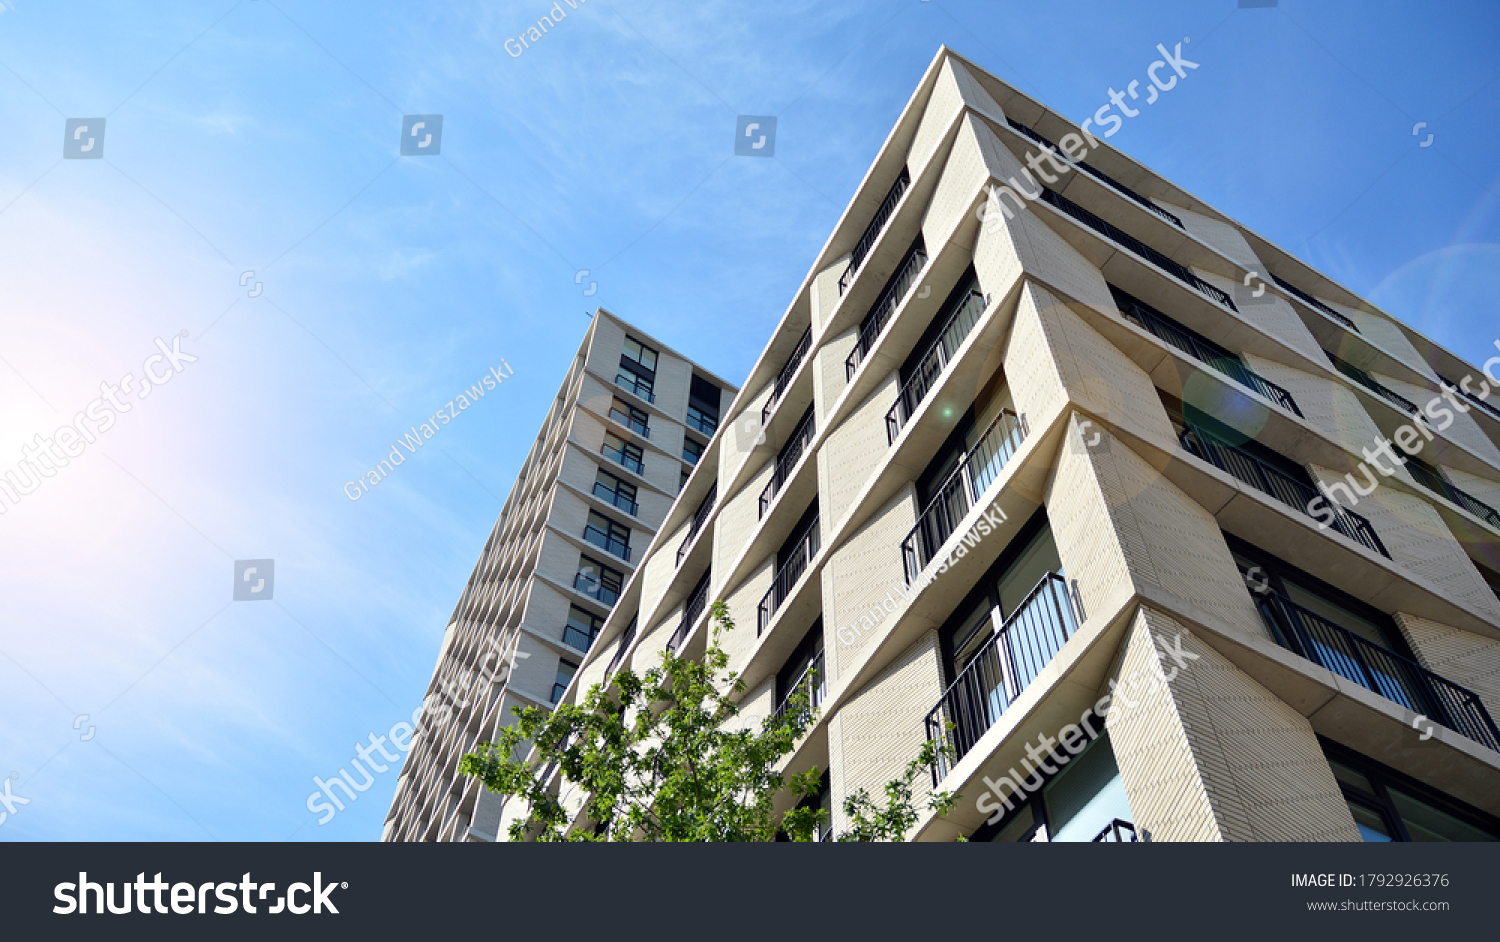 New housing landscape. Facade of a new multi-story residential building. #1792926376